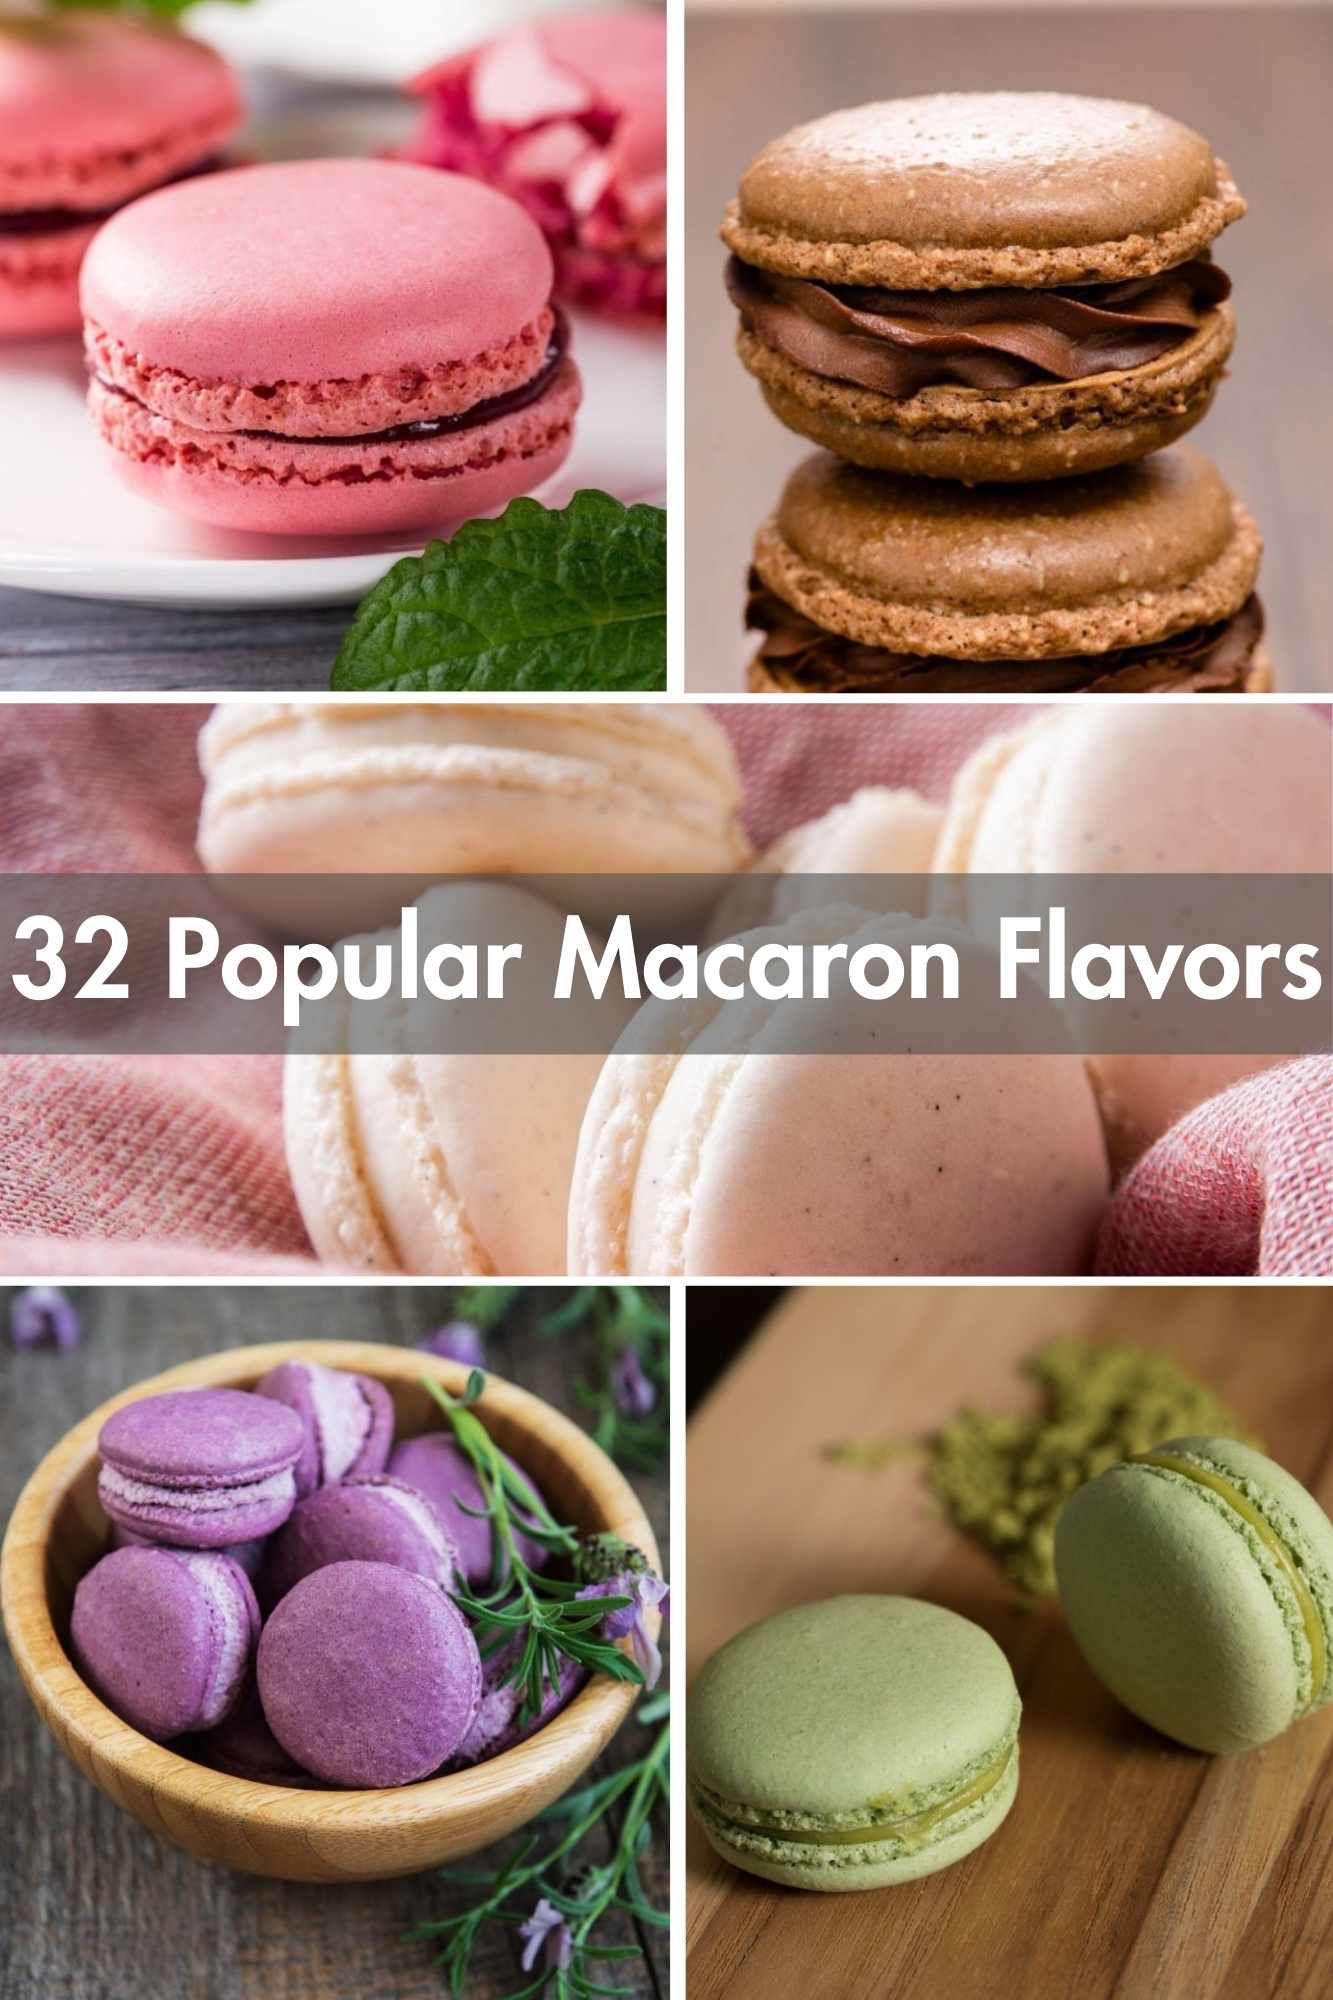 Have you ever enjoyed the indulgent and sweet taste of classic macarons? If you’re curious about these fun and delectable French treasures, keep reading for 32 of the best Macaron Flavors and fillings recipes that are fun to make at home!